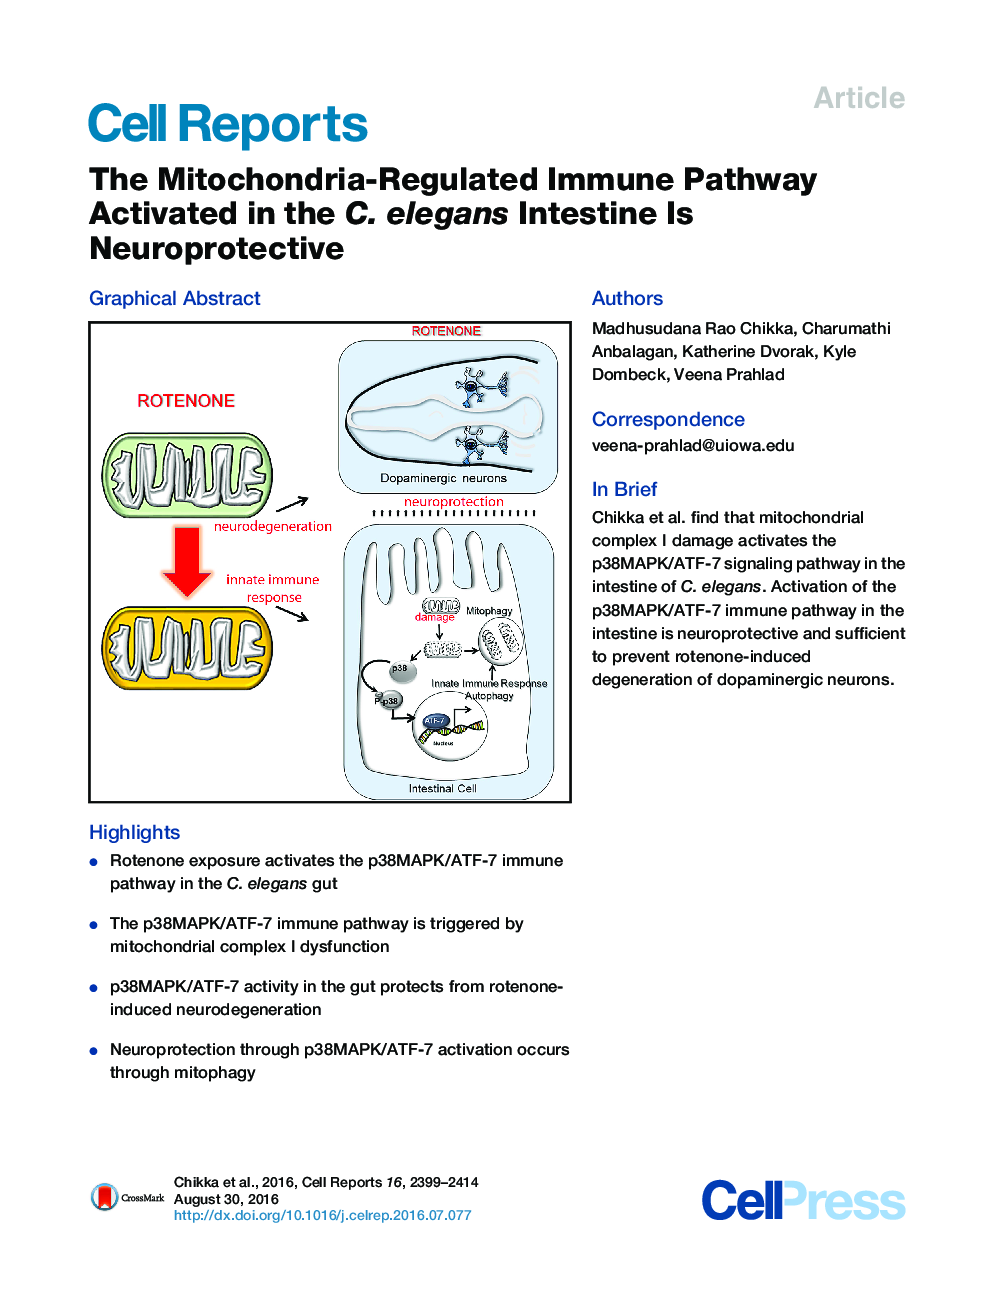 The Mitochondria-Regulated Immune Pathway Activated in the C. elegans Intestine Is Neuroprotective